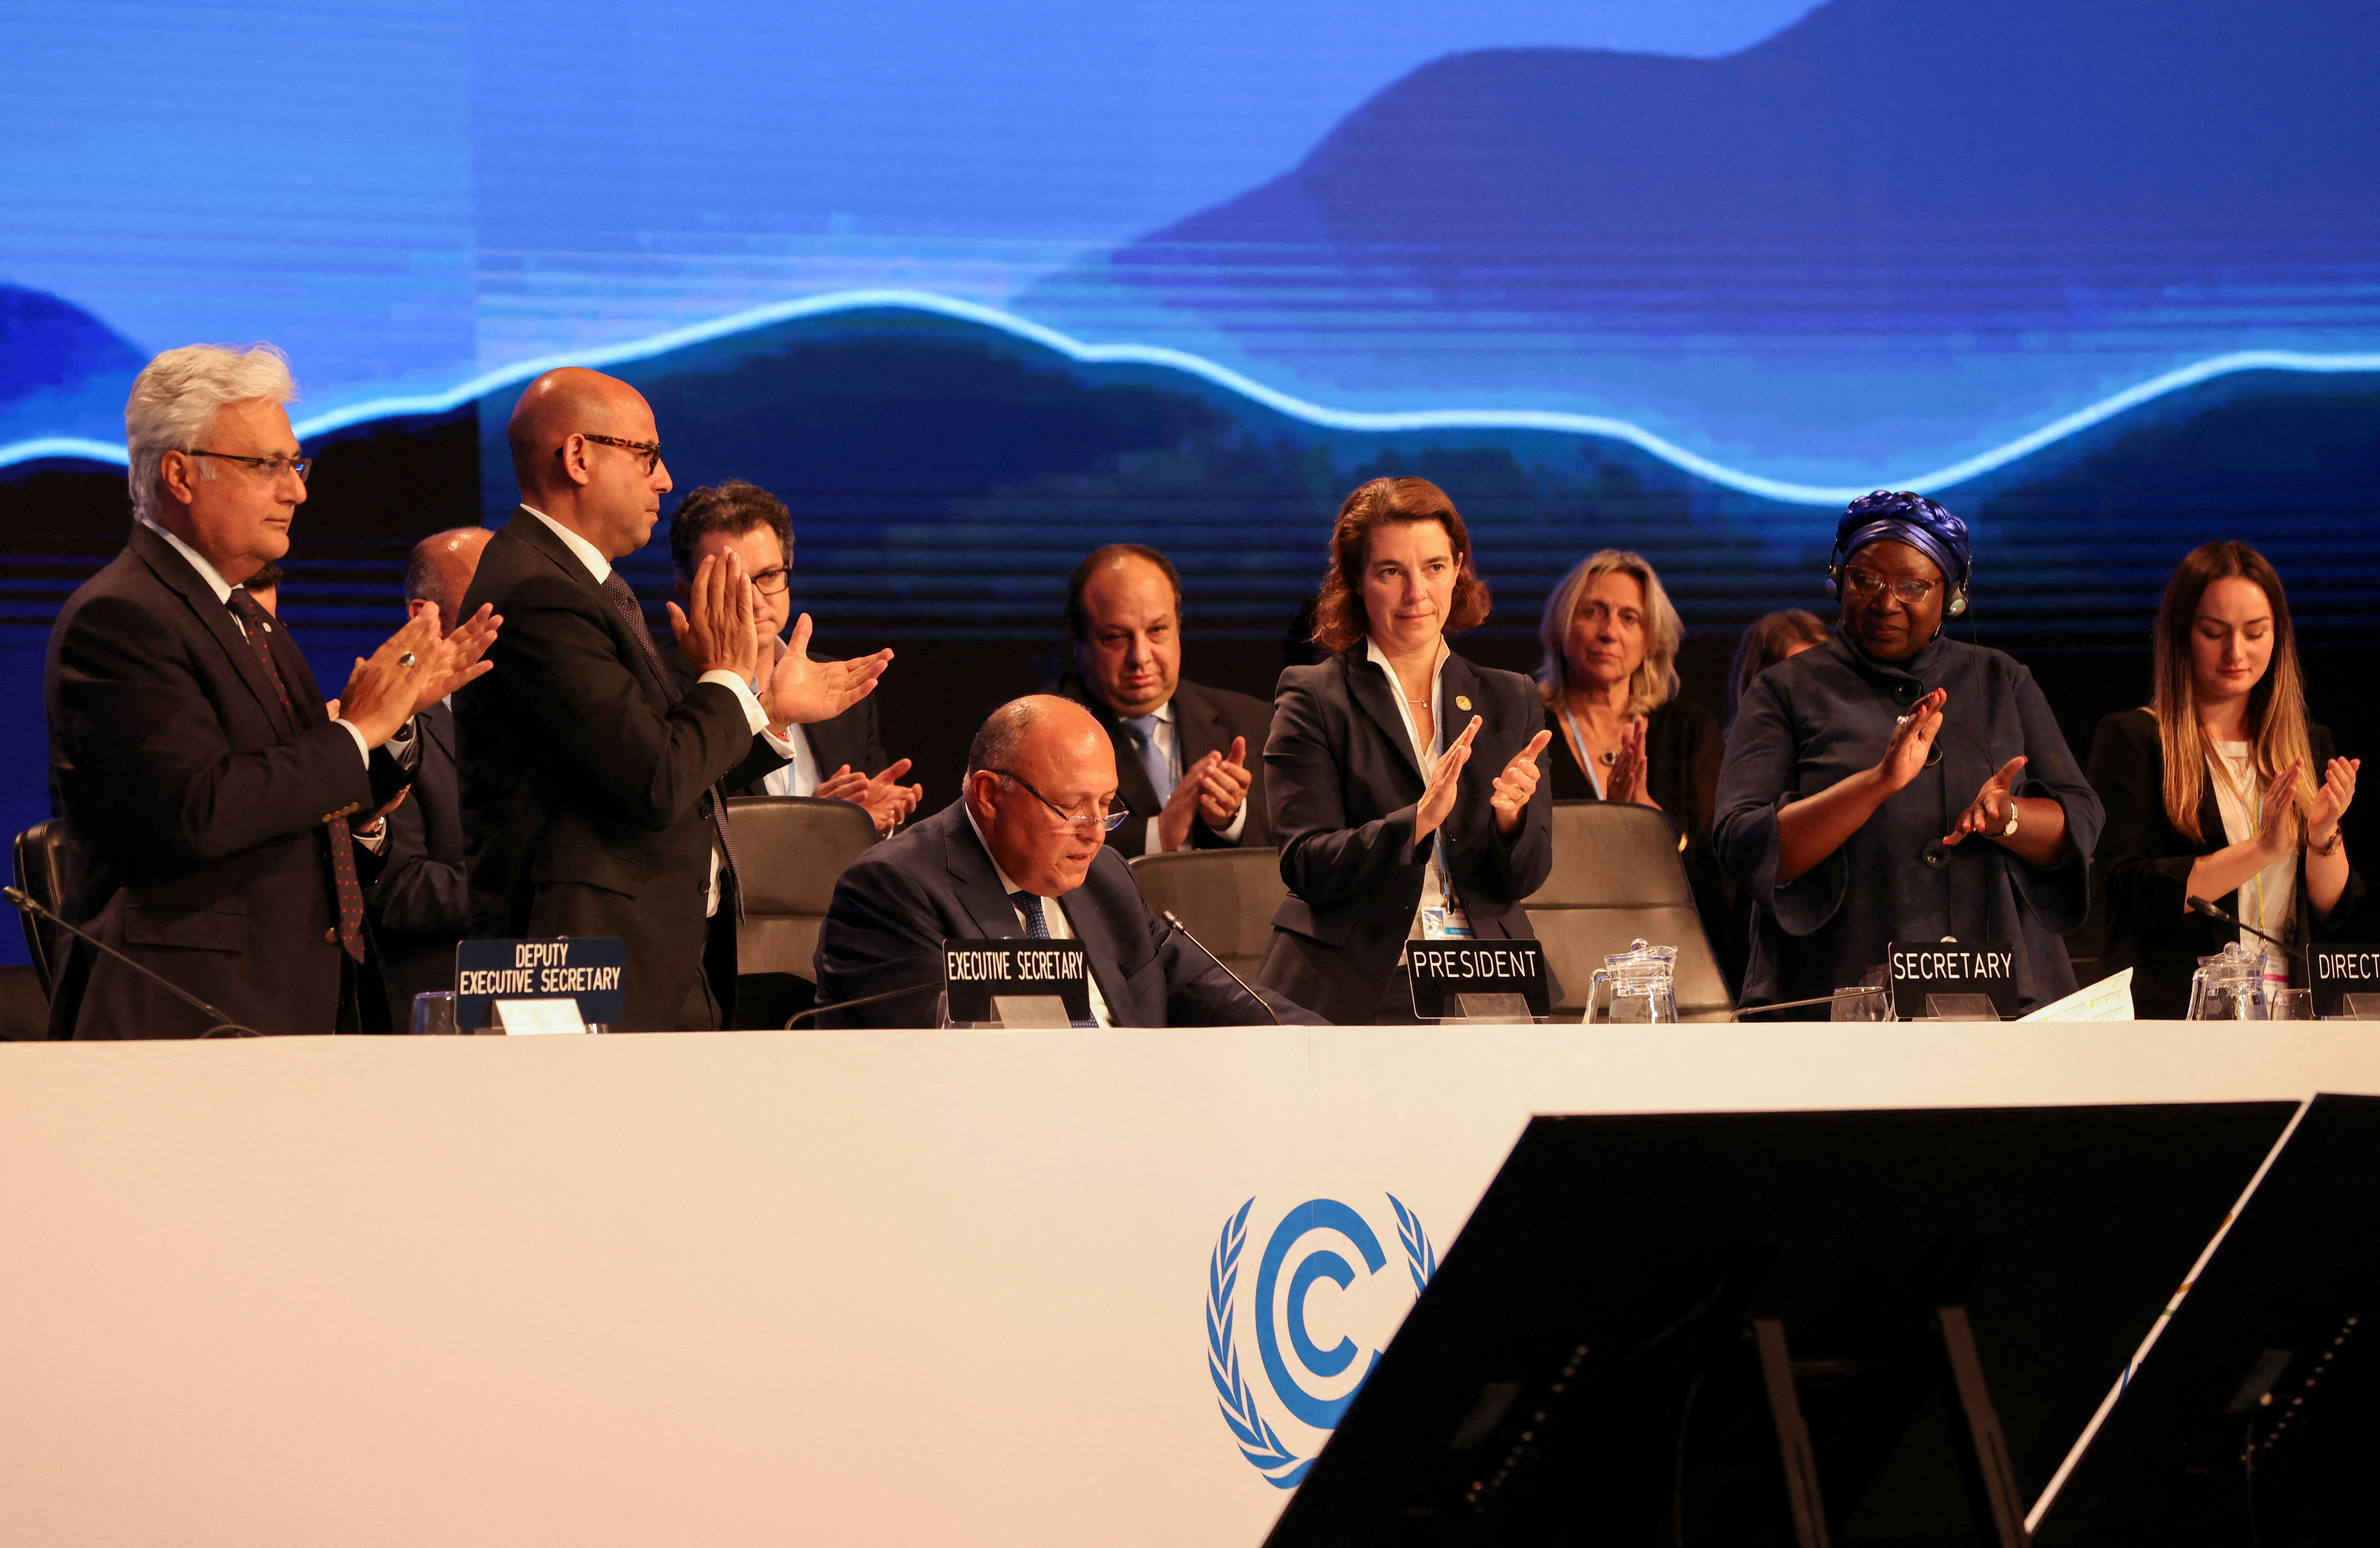 Delegates applaud as COP27 President Sameh Shoukry delivers a statement during the closing plenary at the COP27 climate summit in Sharm el-Sheikh. REduters /Mohamed Abd El Ghany